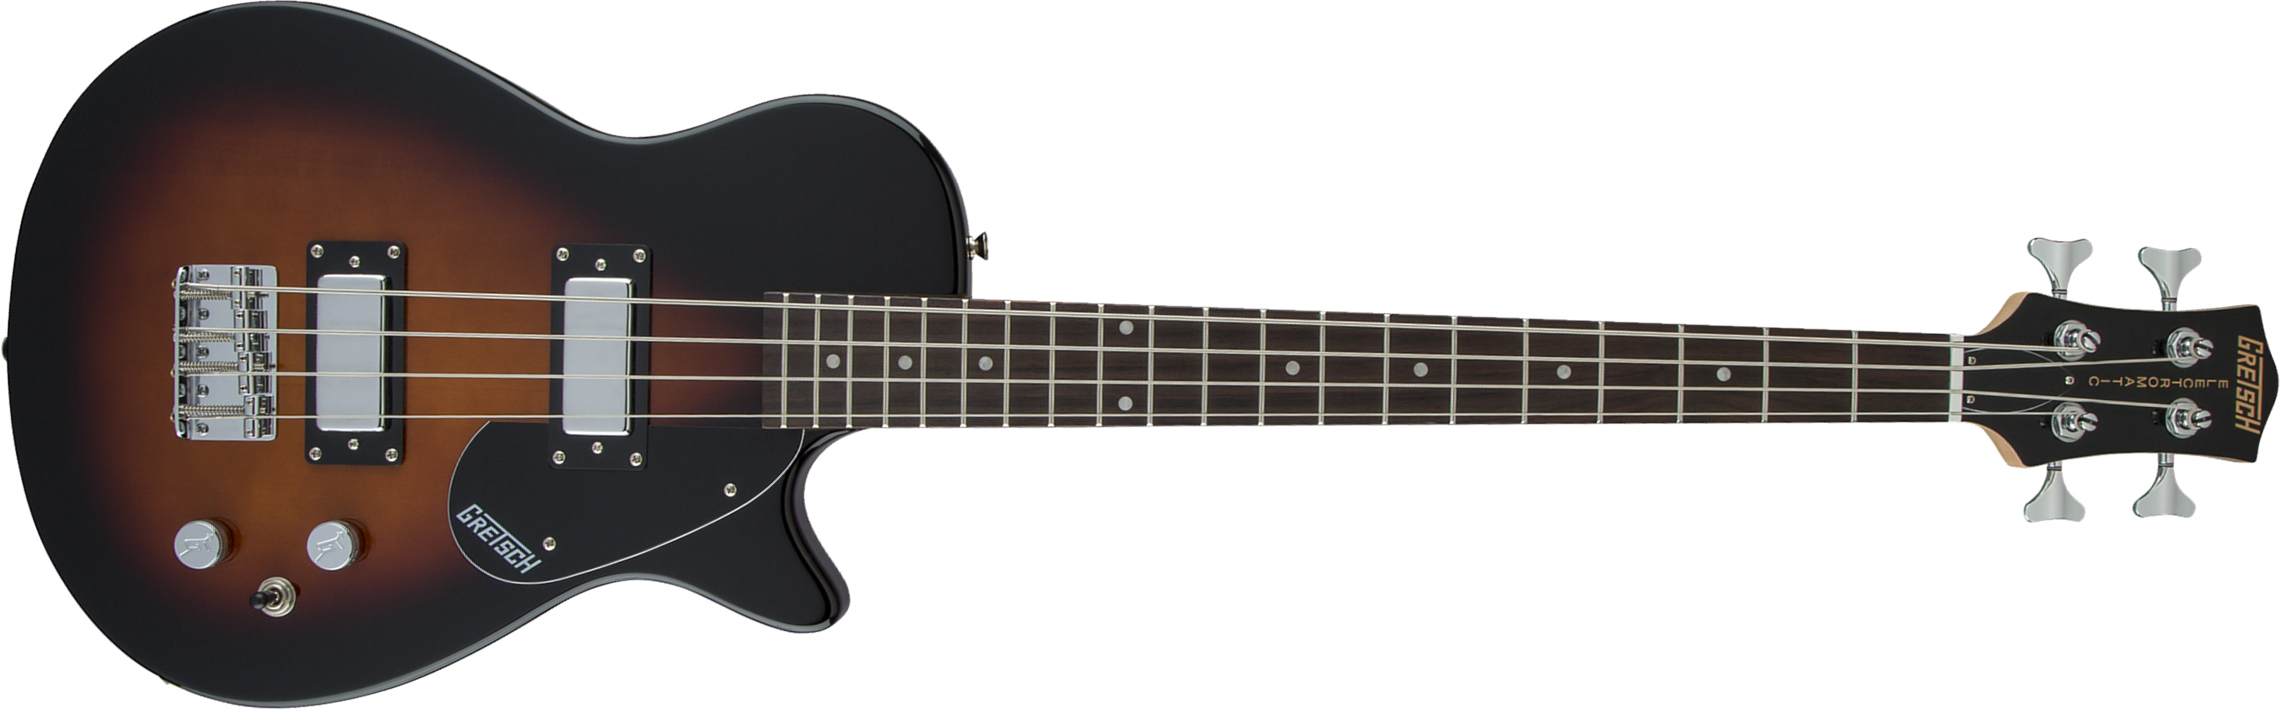 Gretsch G2220 Electromatic Junior Jet Bass Ii Short-scale 2019 Hh Wal - Tobacco Sunburst - Electric bass for kids - Main picture